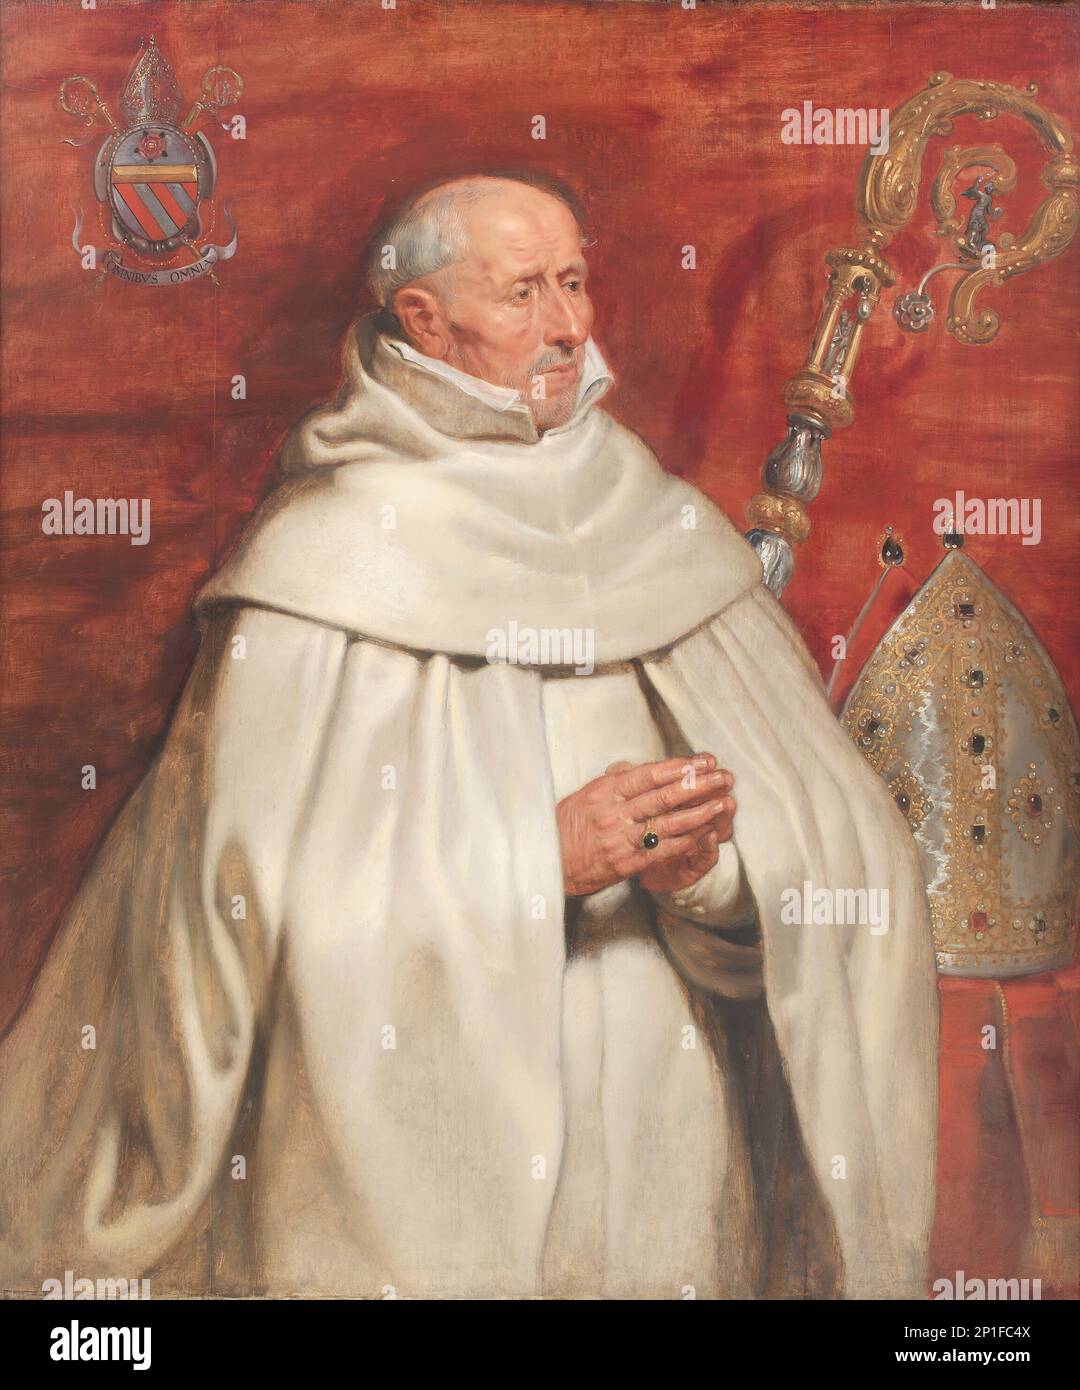 Matthaeus Yrsselius (1541-1629), Abbot of Sint-Michiel's Abbey in Antwerp, 1622-1625. (Commissioned an altarpiece depicting the Adoration of the Magi from Rubens). Stock Photo